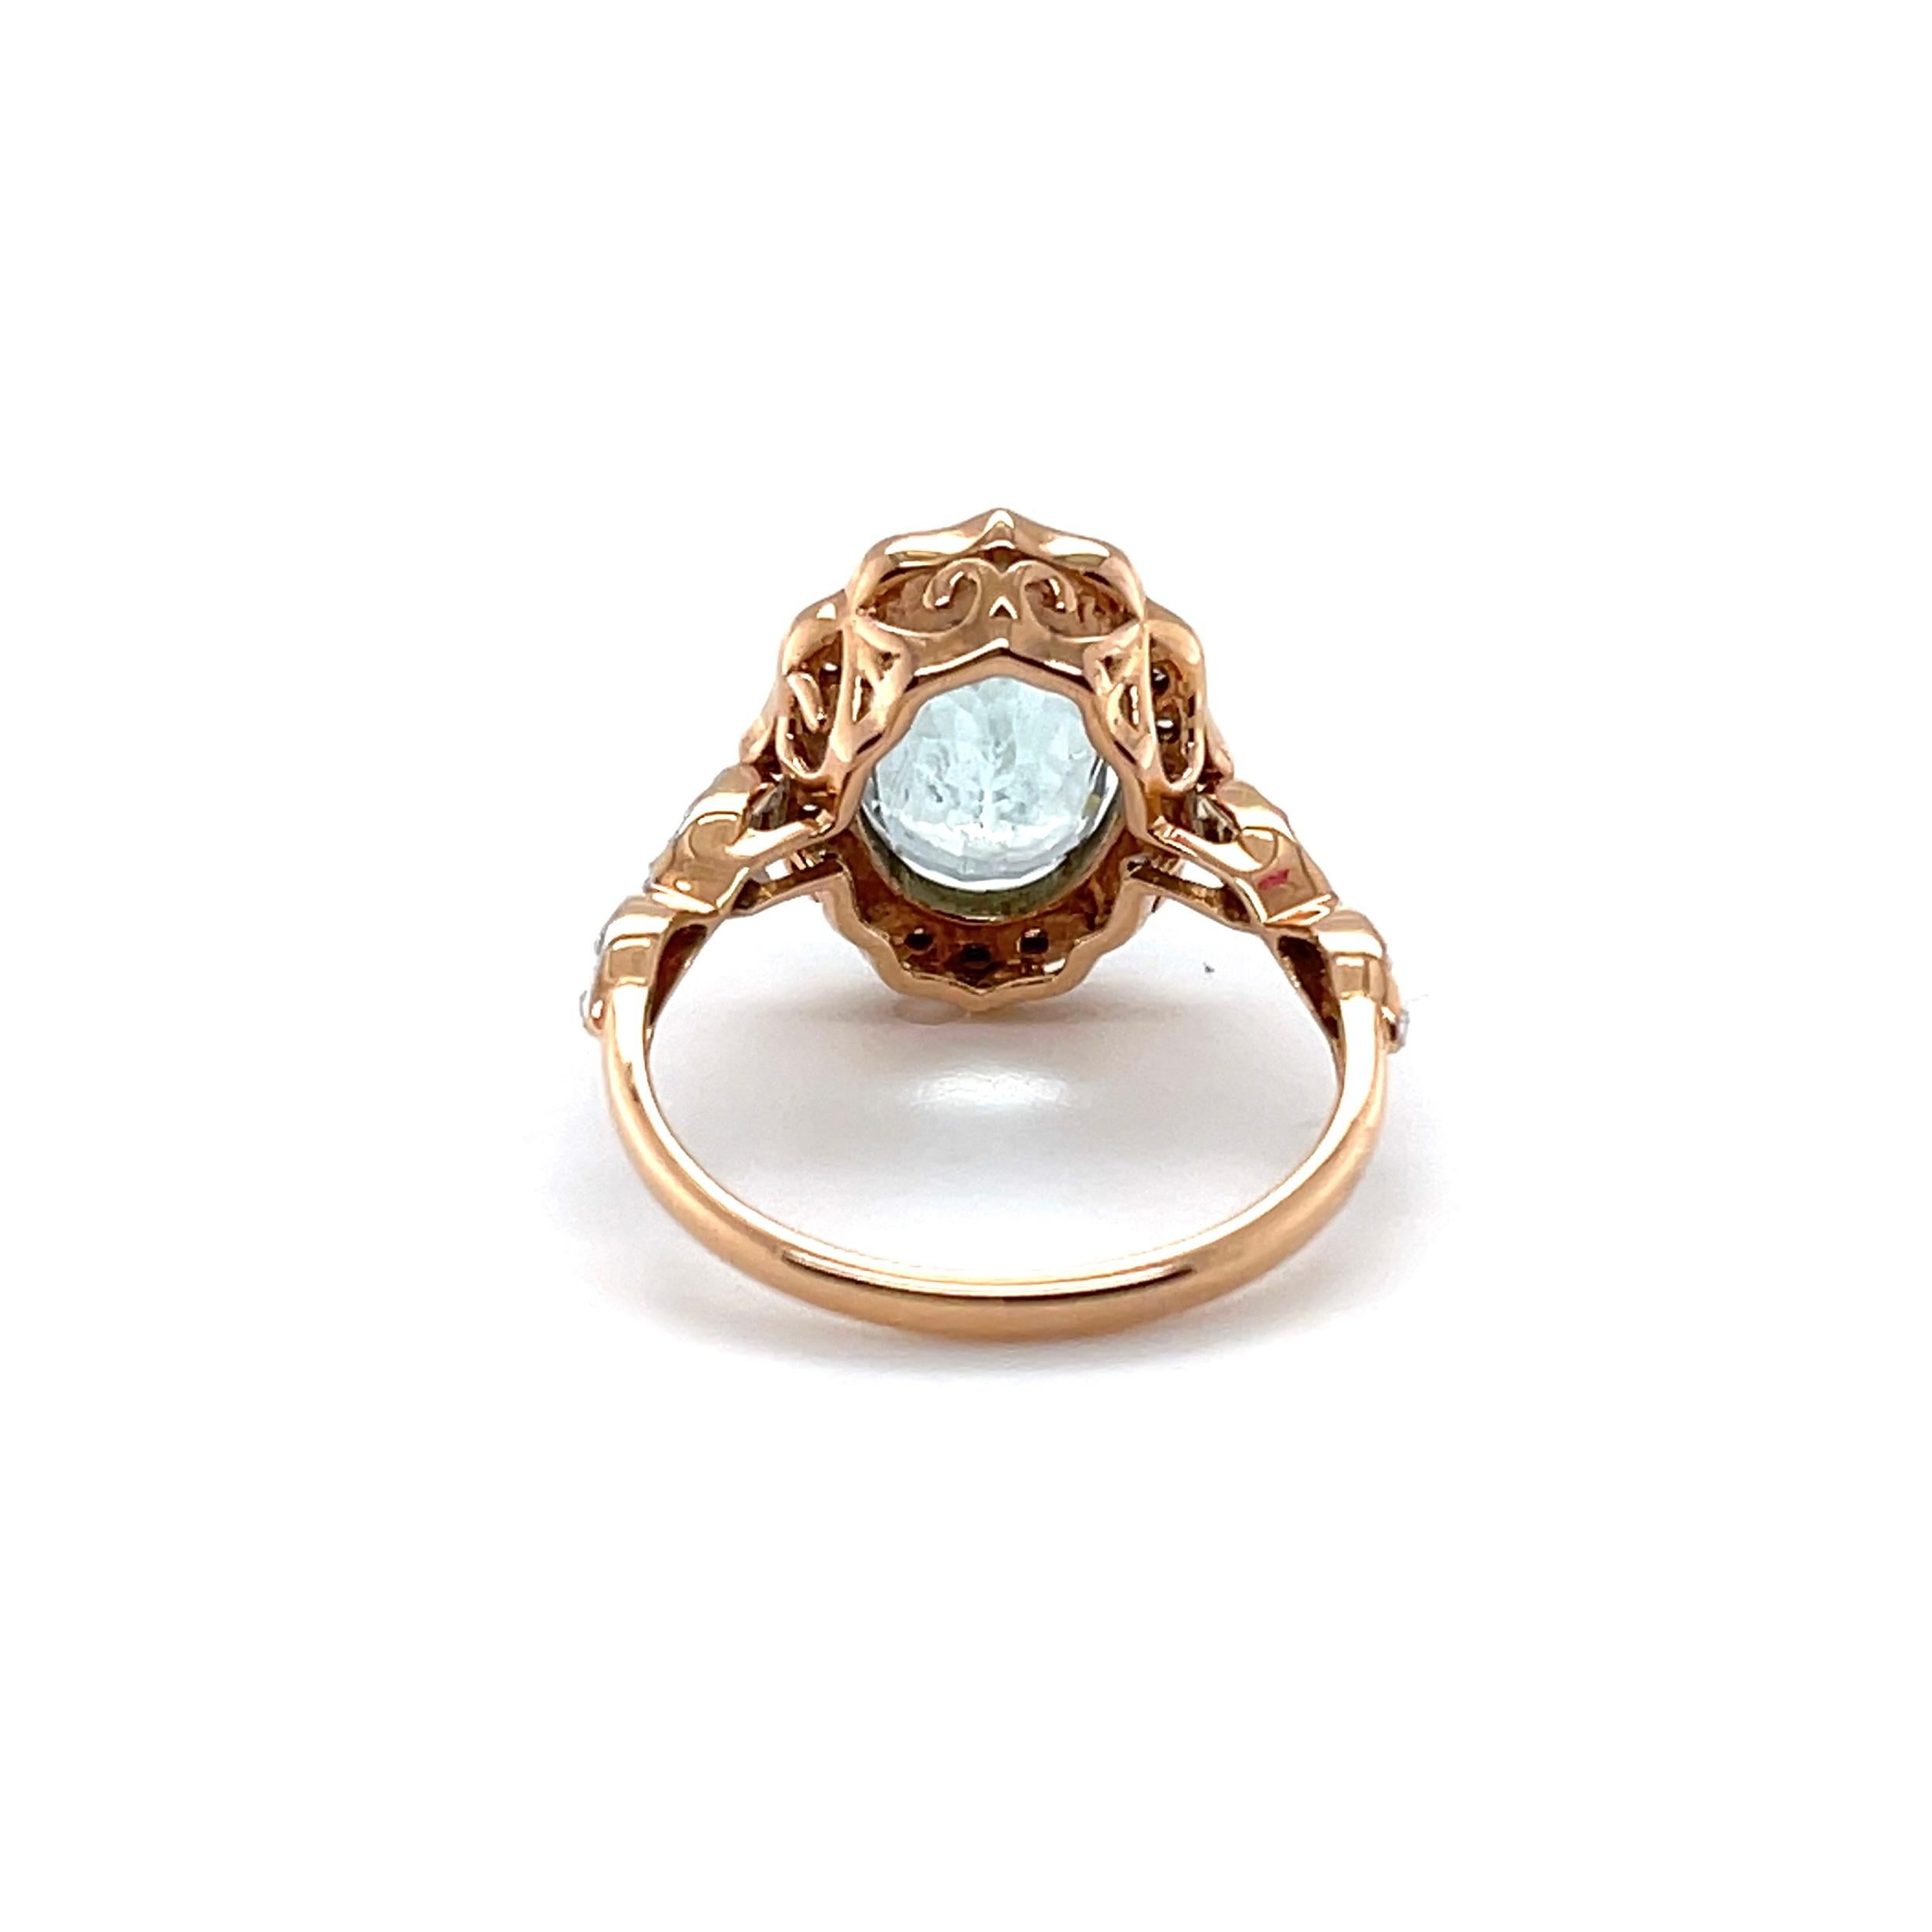 For Sale:  18ct Rose Gold Ring with 3.11ct Aquamarine and Diamond 4